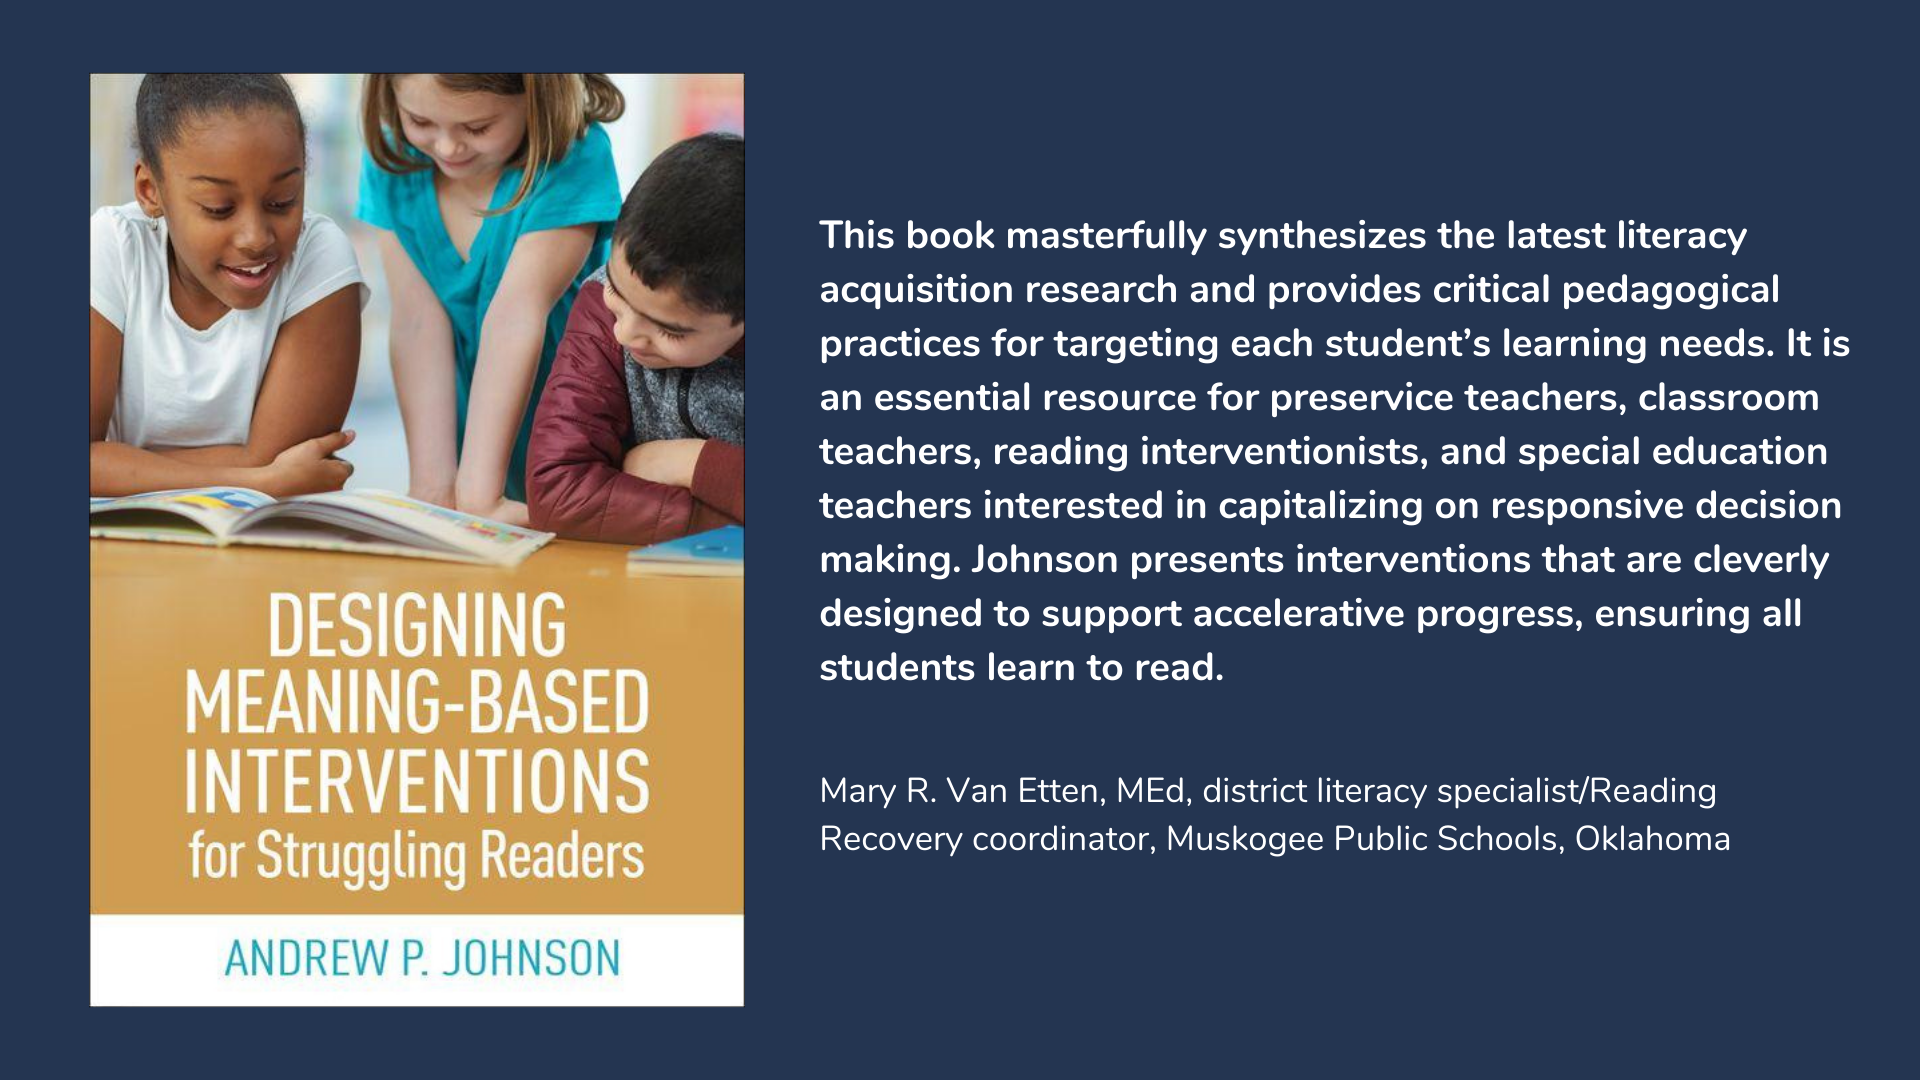 Designing Meaning-Based Interventions for Struggling Readers, book cover and description.